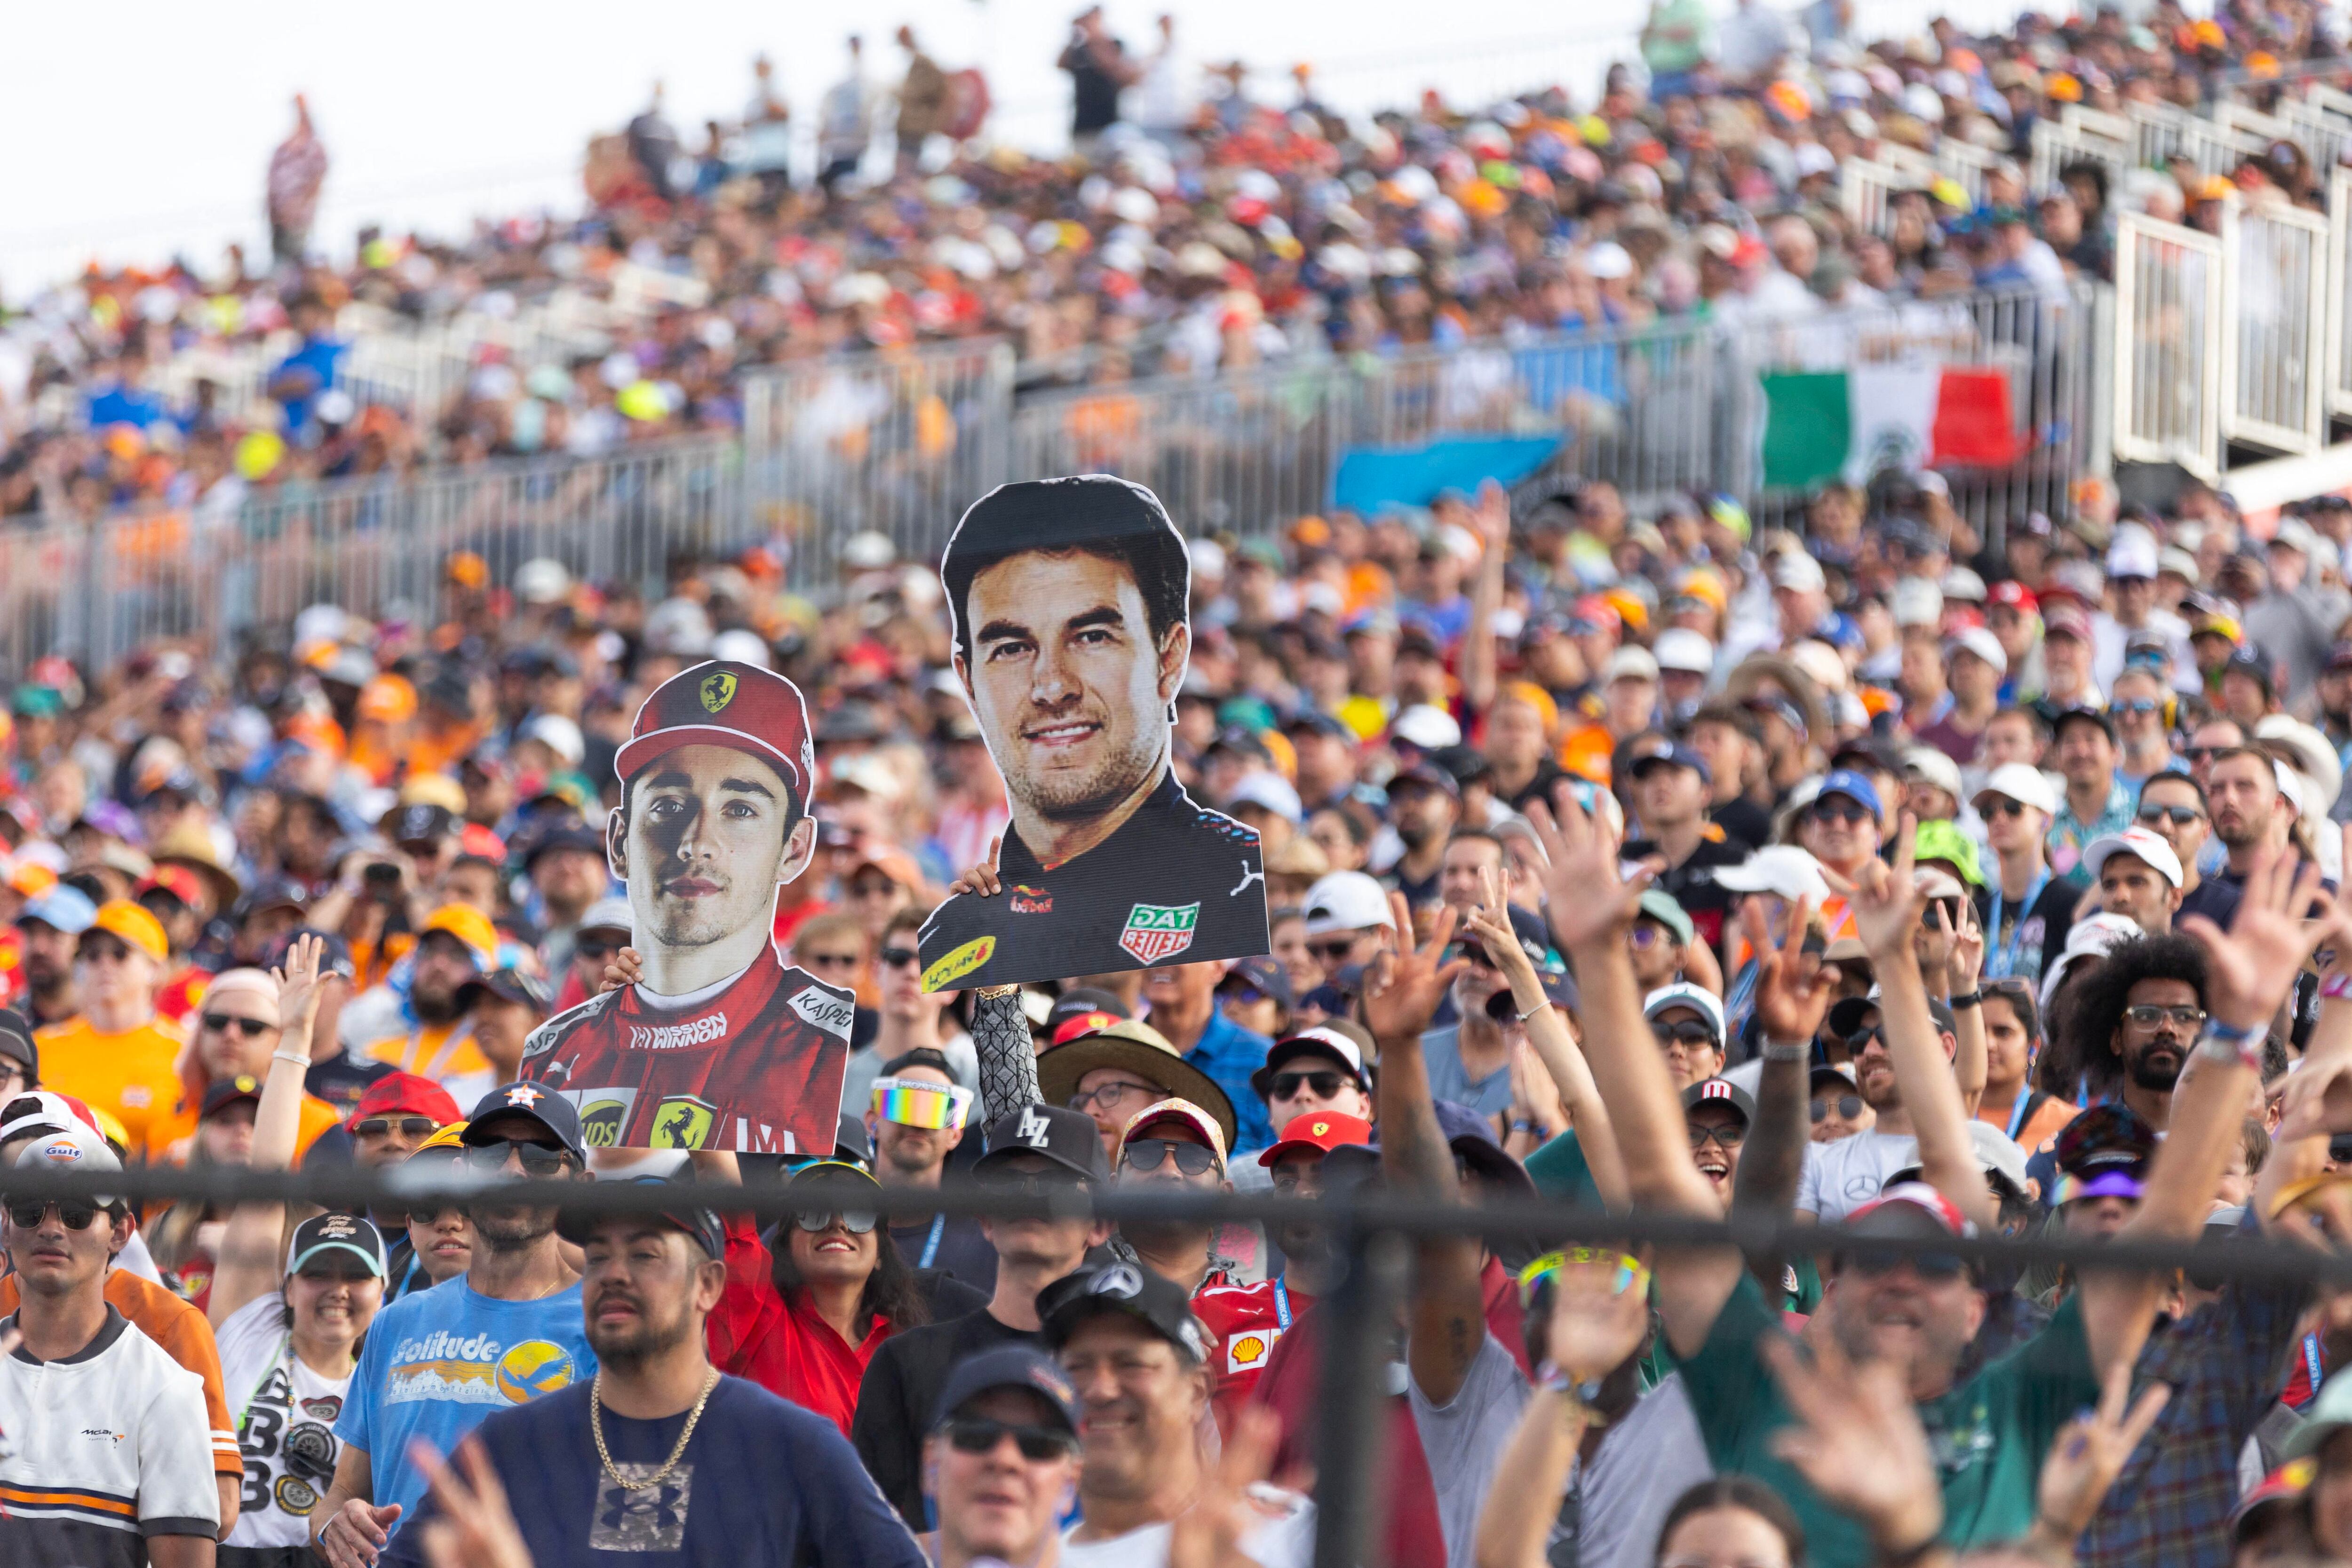 Oct 21, 2023; Austin, Texas, USA; Racing fans hold up likenesses of Charles Leclerc of Ferrari and Sergio Perez of Red Bull Racing during the Sprint Race of the 2023 United States Grand Prix at Circuit of the Americas. Mandatory Credit: Erich Schlegel-USA TODAY Sports